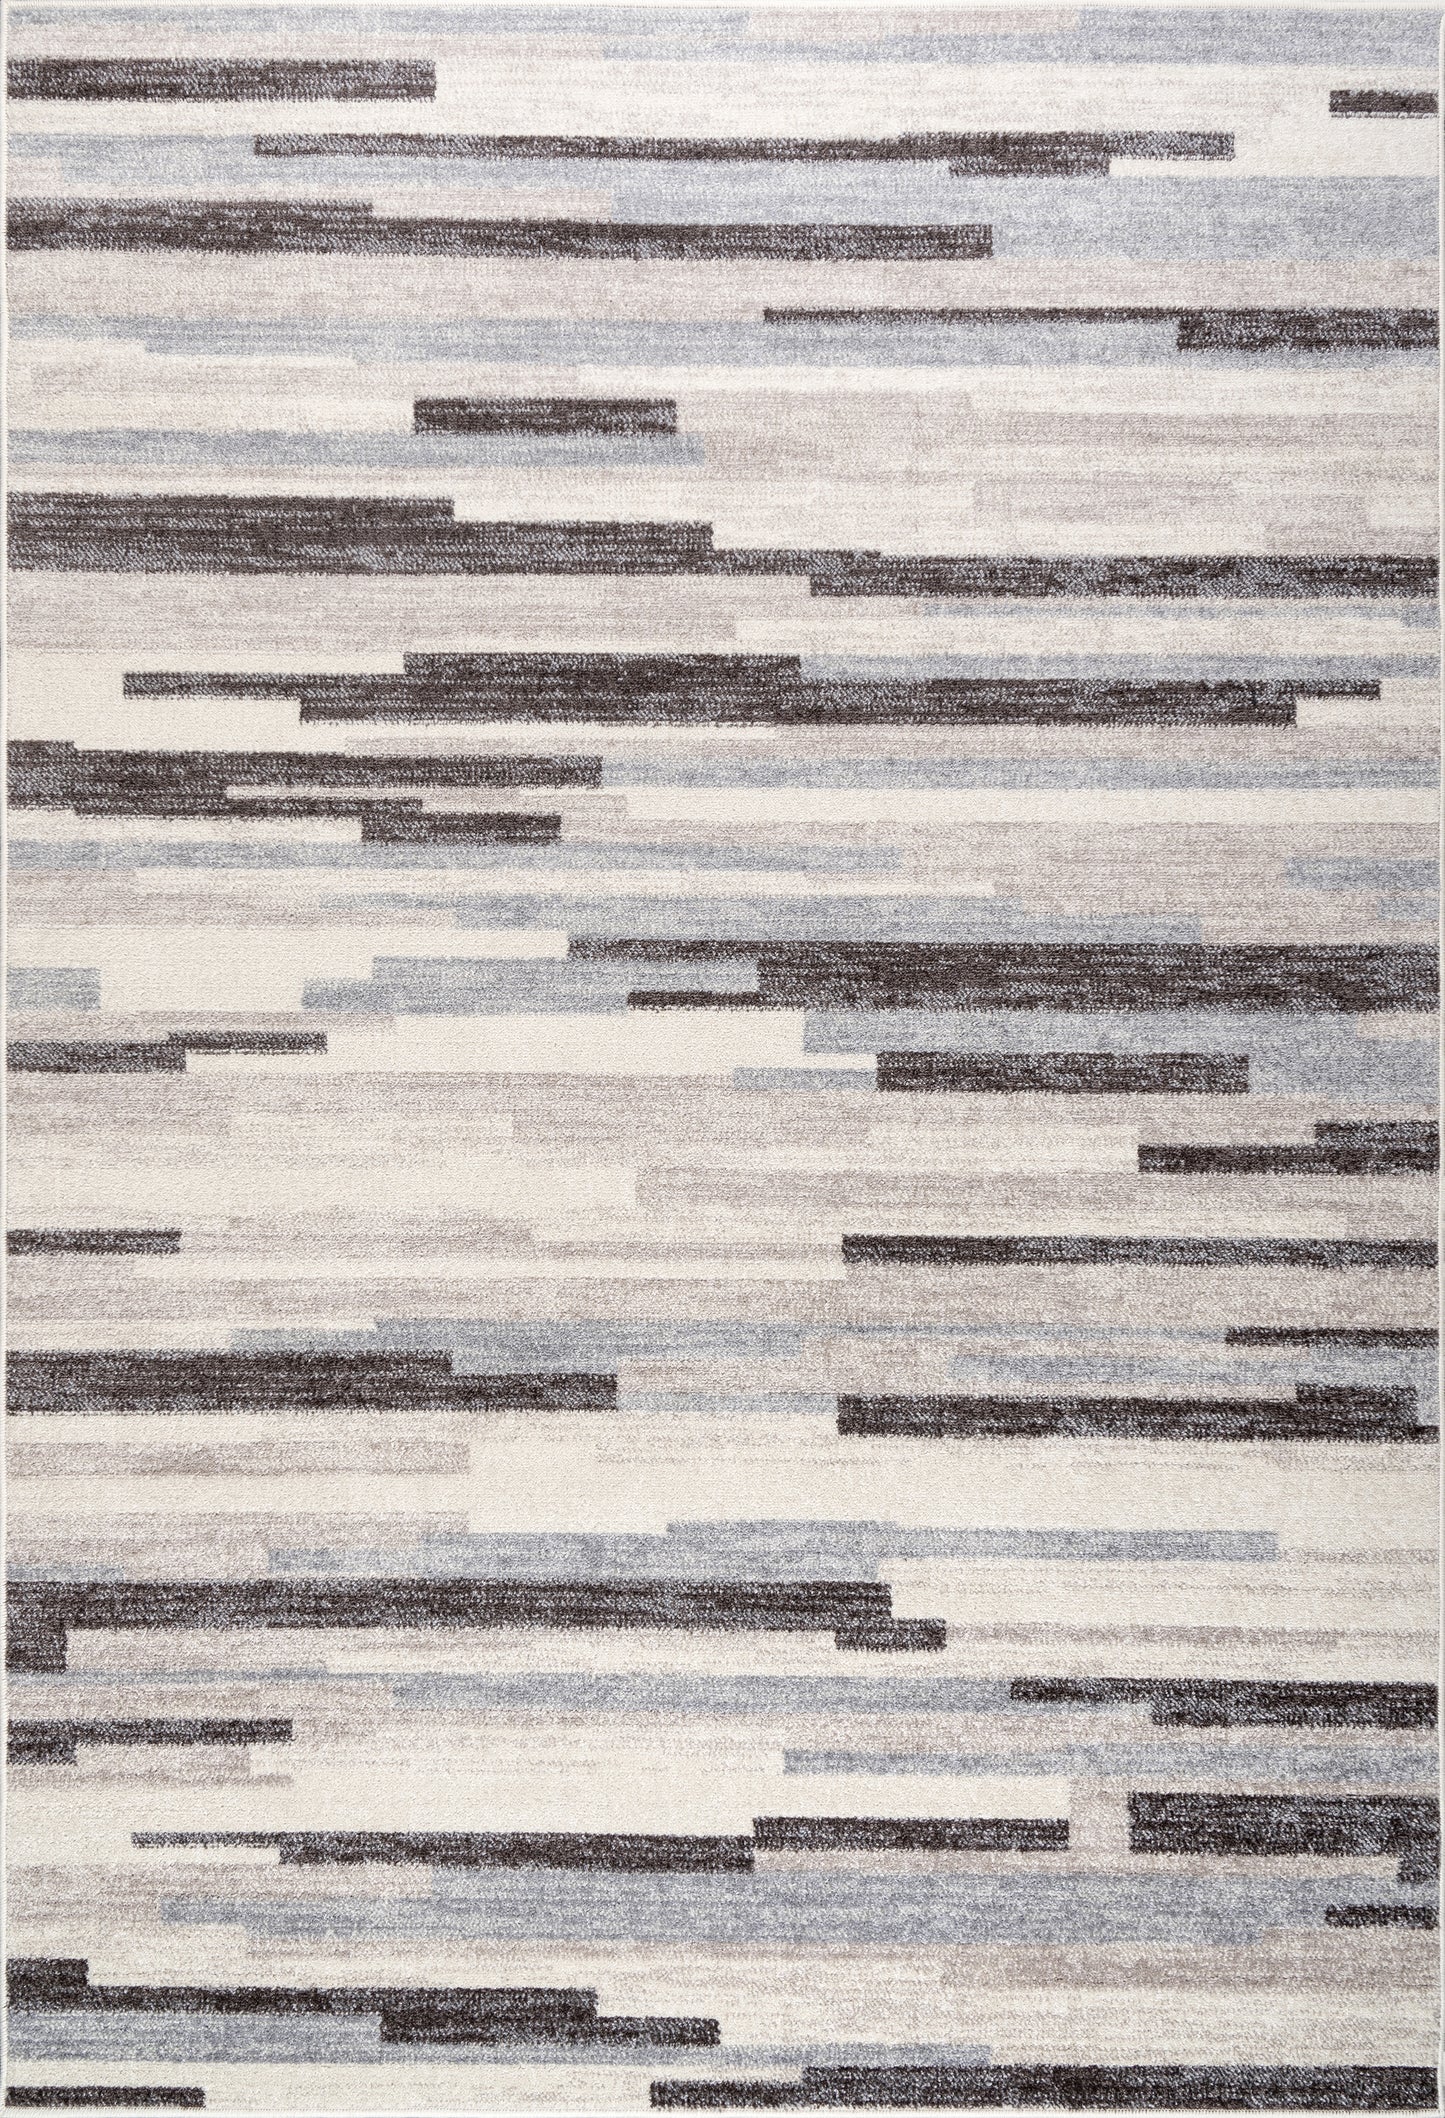 LaDole Rugs Abstract Striped Geometric Minimalist Contemporary  Rug - Modern Carpet for Living Room, Bedroom, Office, Entrance, and Hallway - Cream and Beige